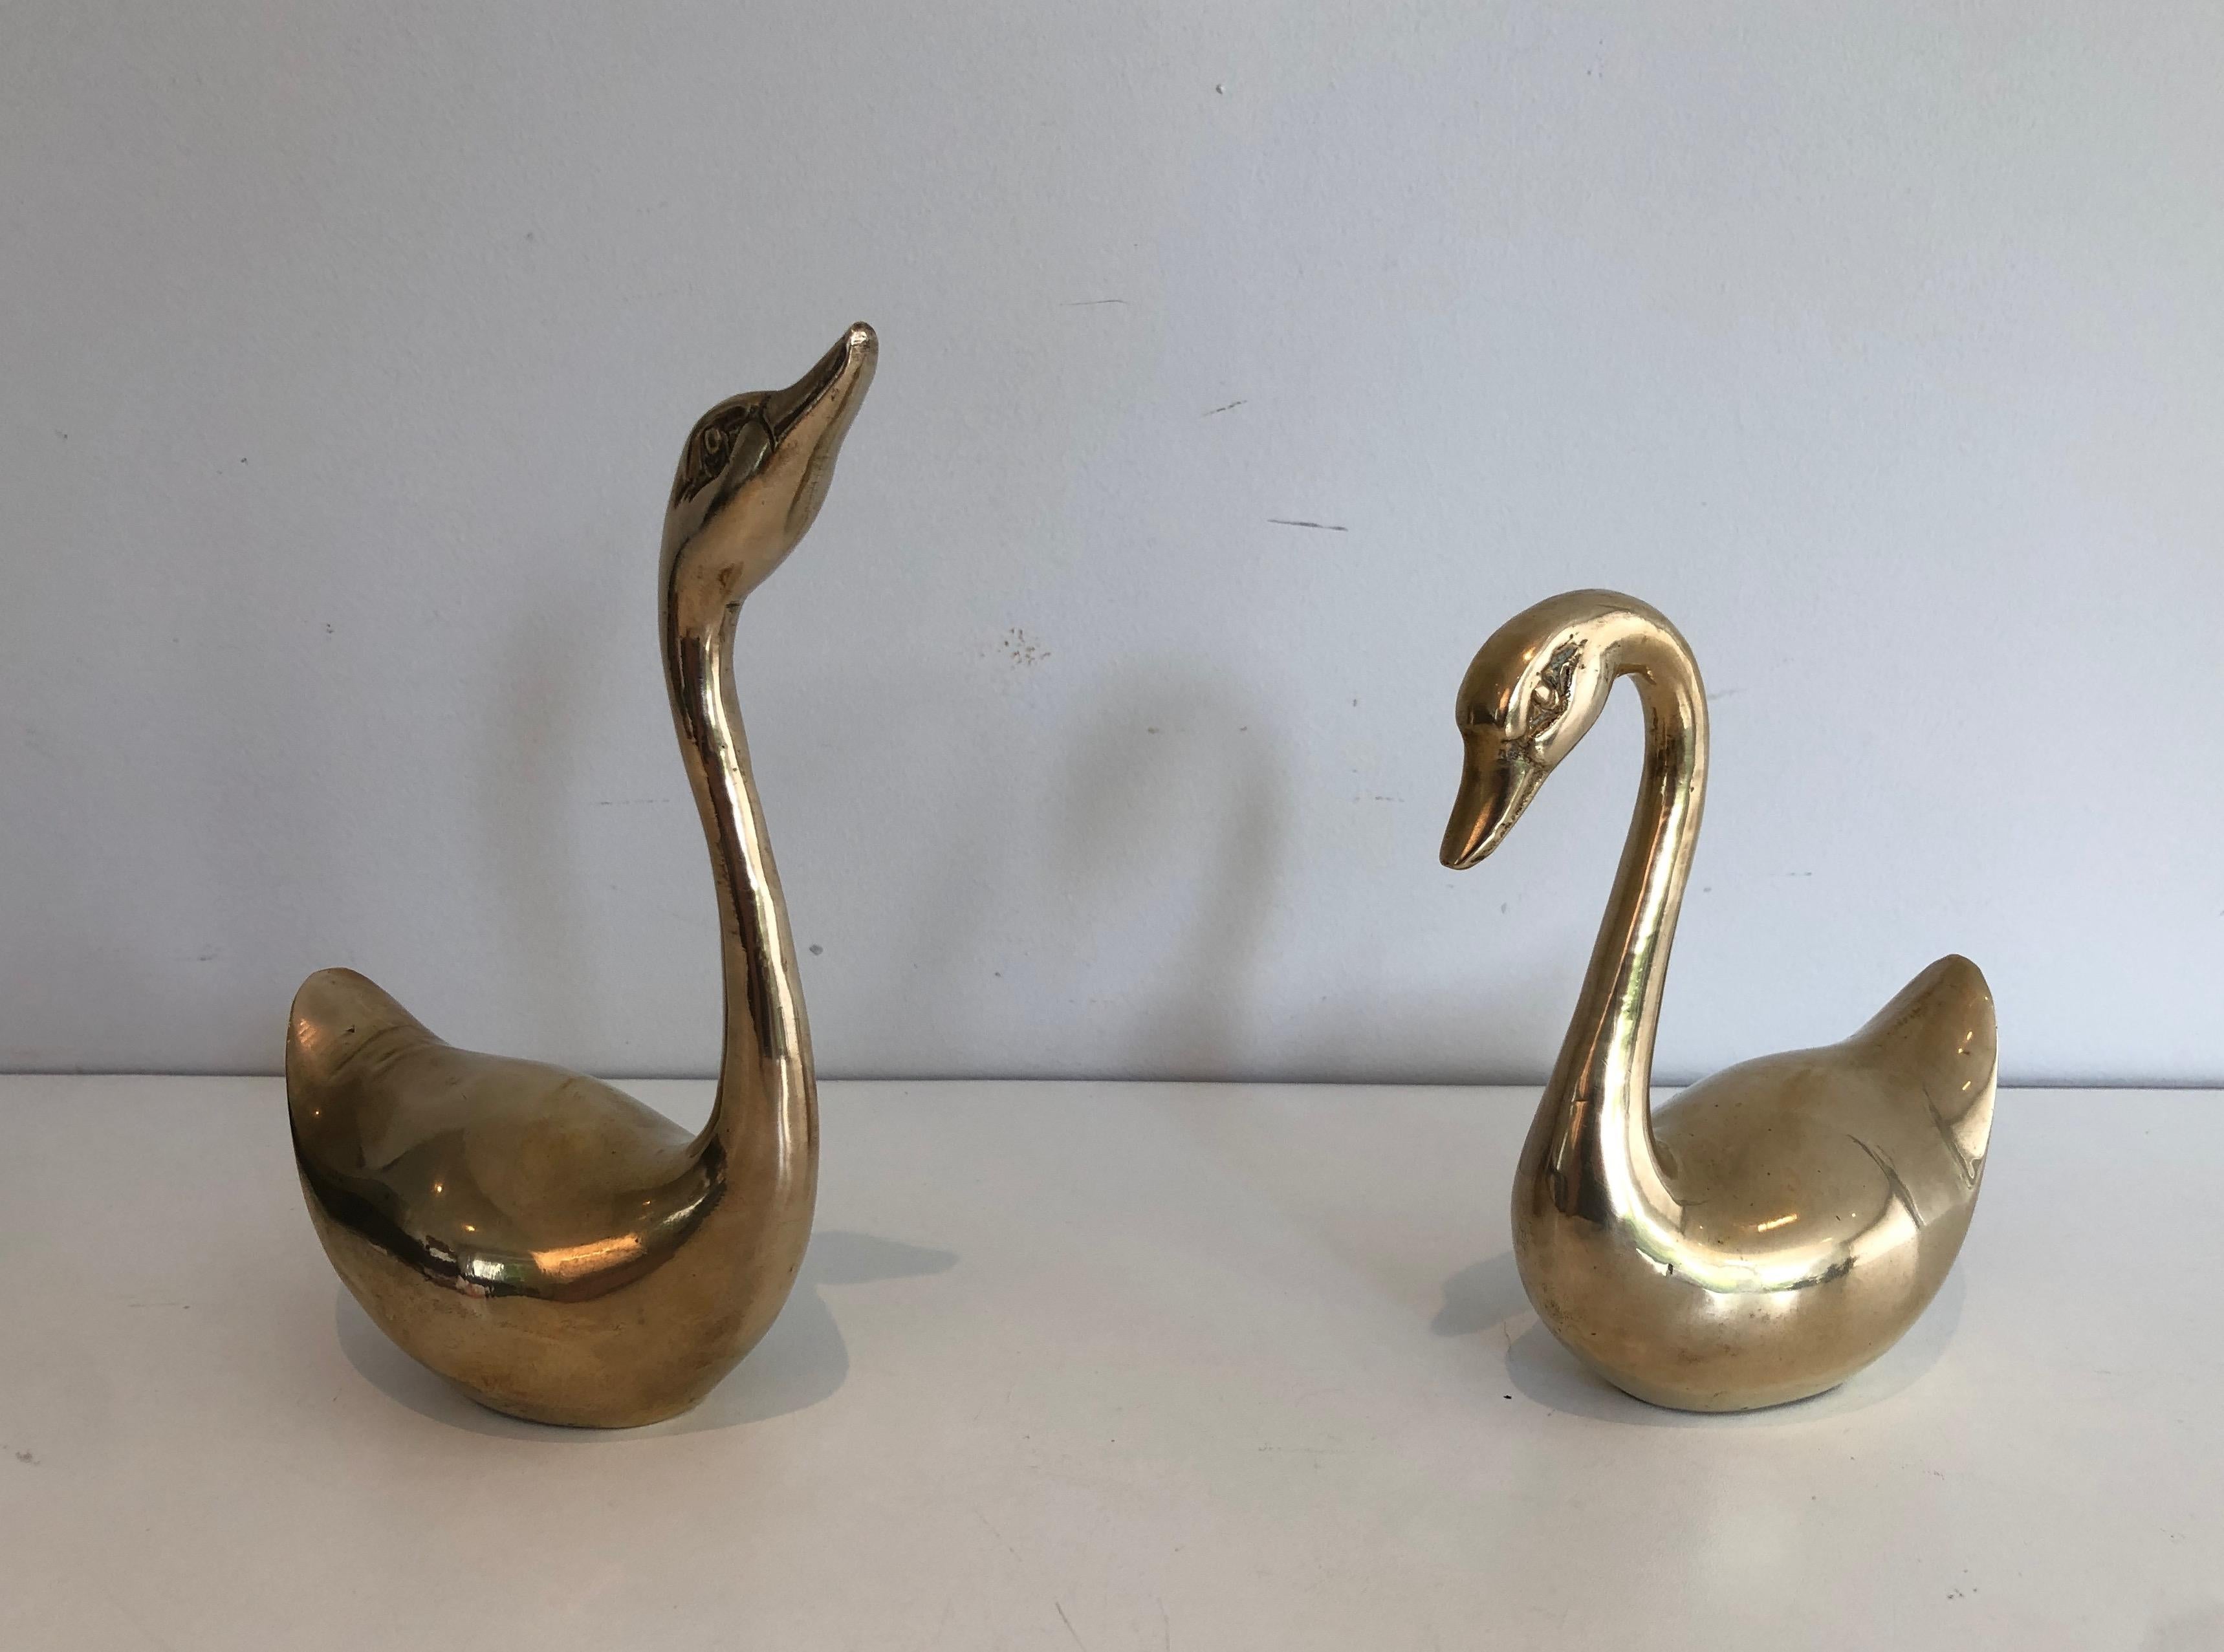 This pair of decorative small ducks is made of brass. This is a French work, circa 1970.